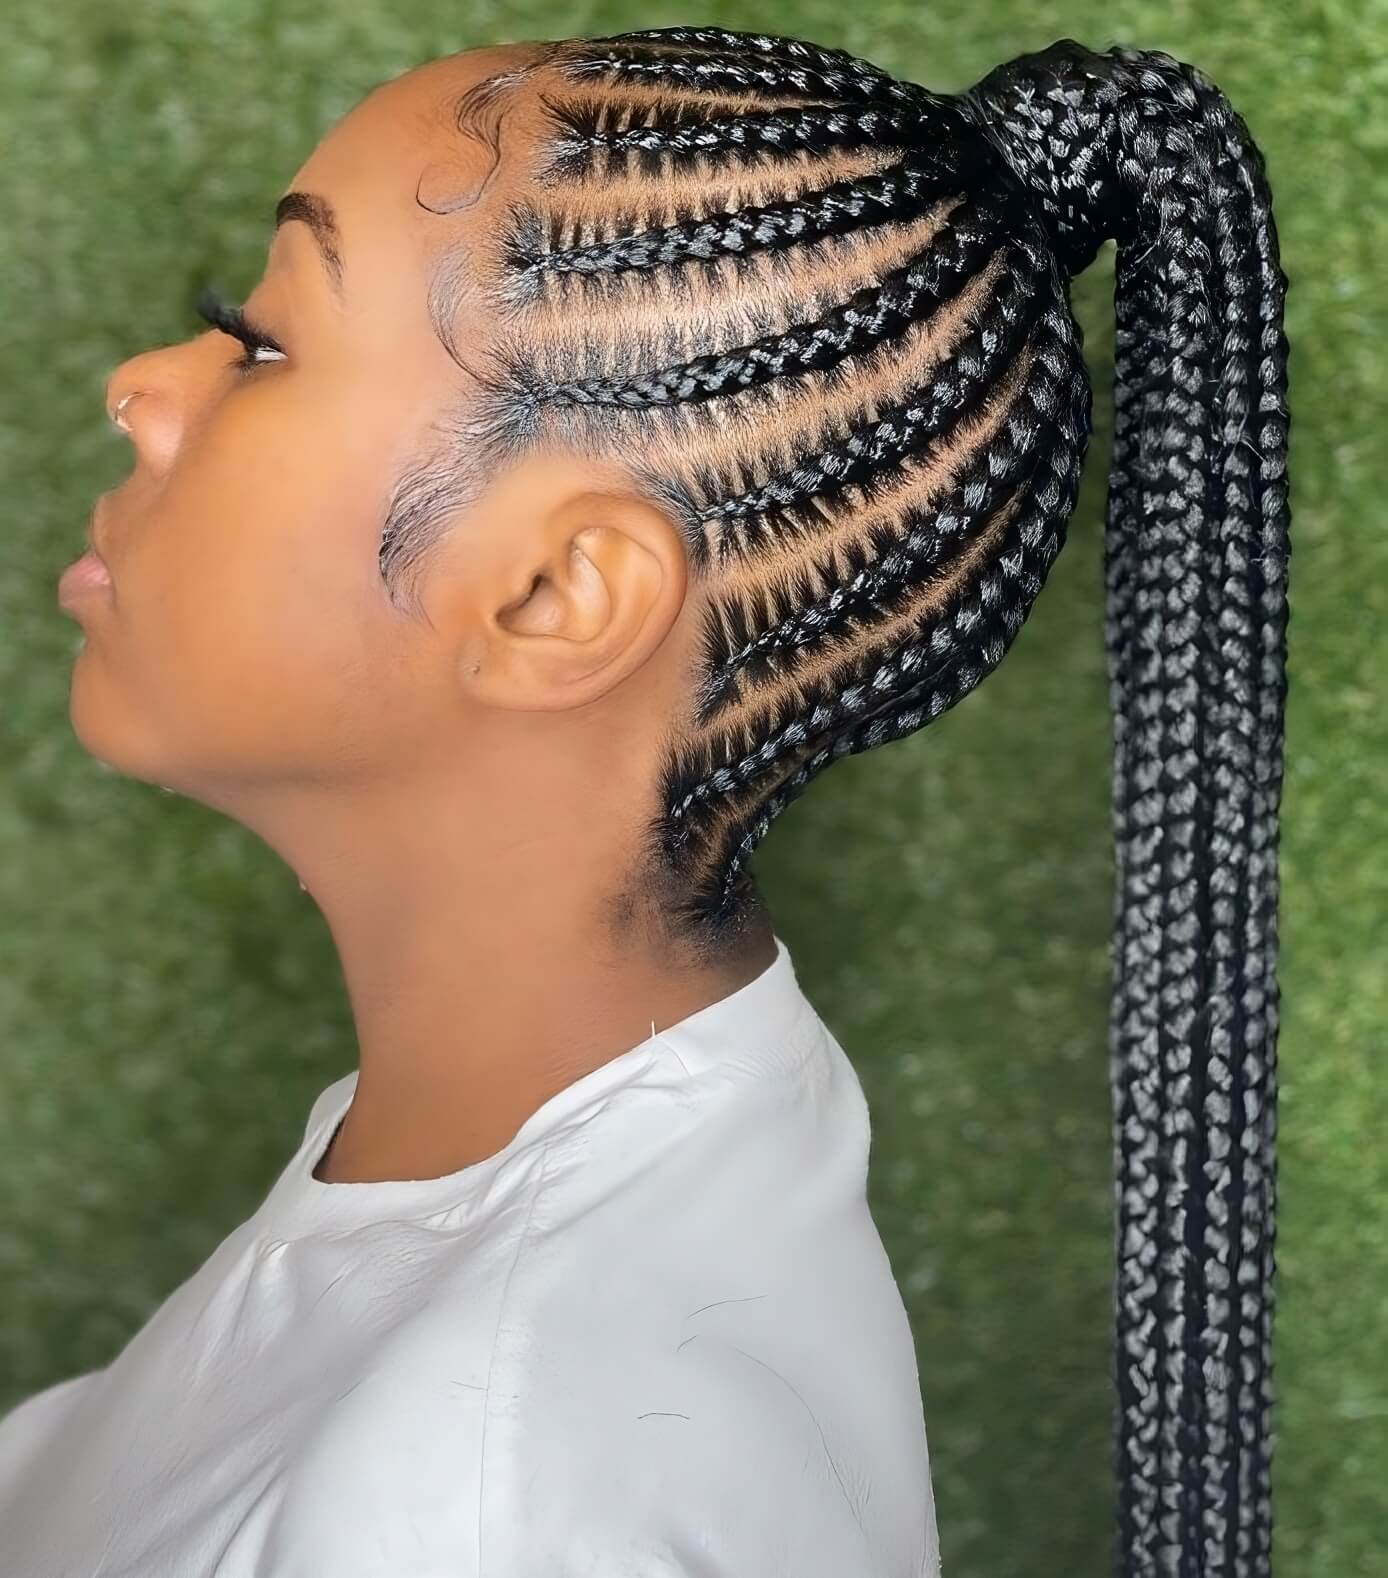 50 Trendy Braided Hairstyles To Instantly Glam Up Your Look - 387